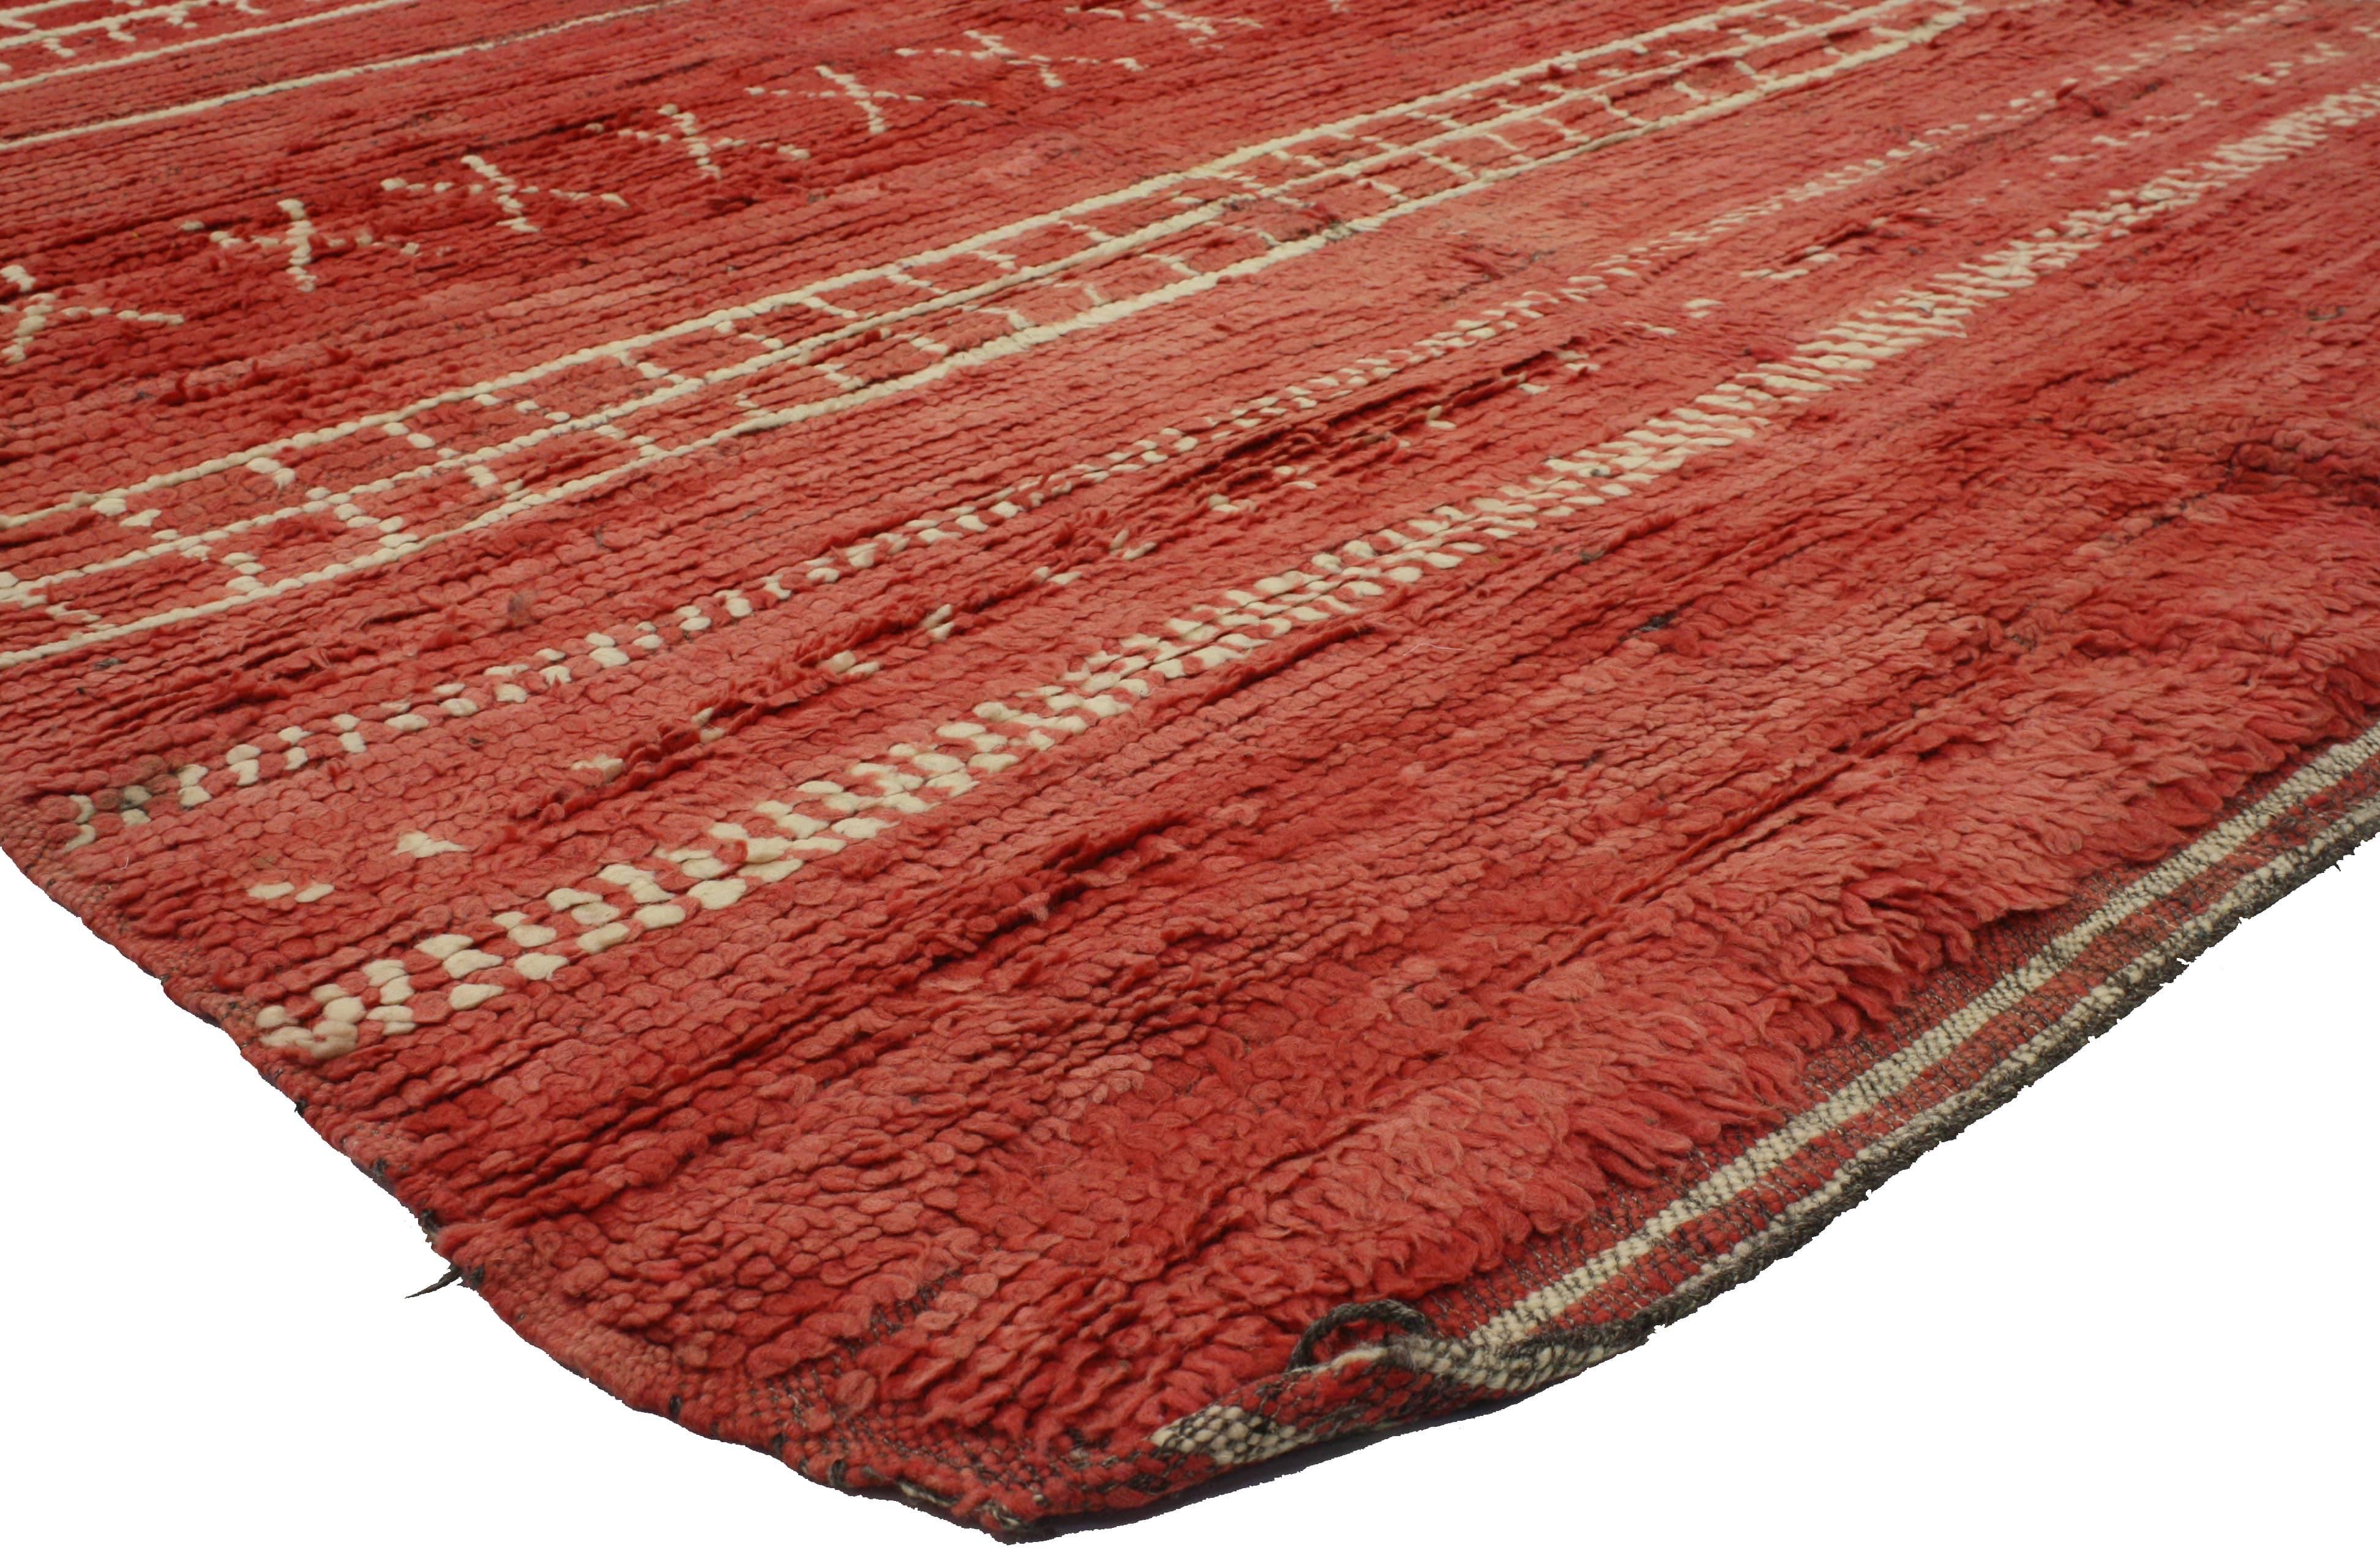 Hand-Knotted Vintage Red Moroccan Rug with Tribal Style, Berber Moroccan Rug